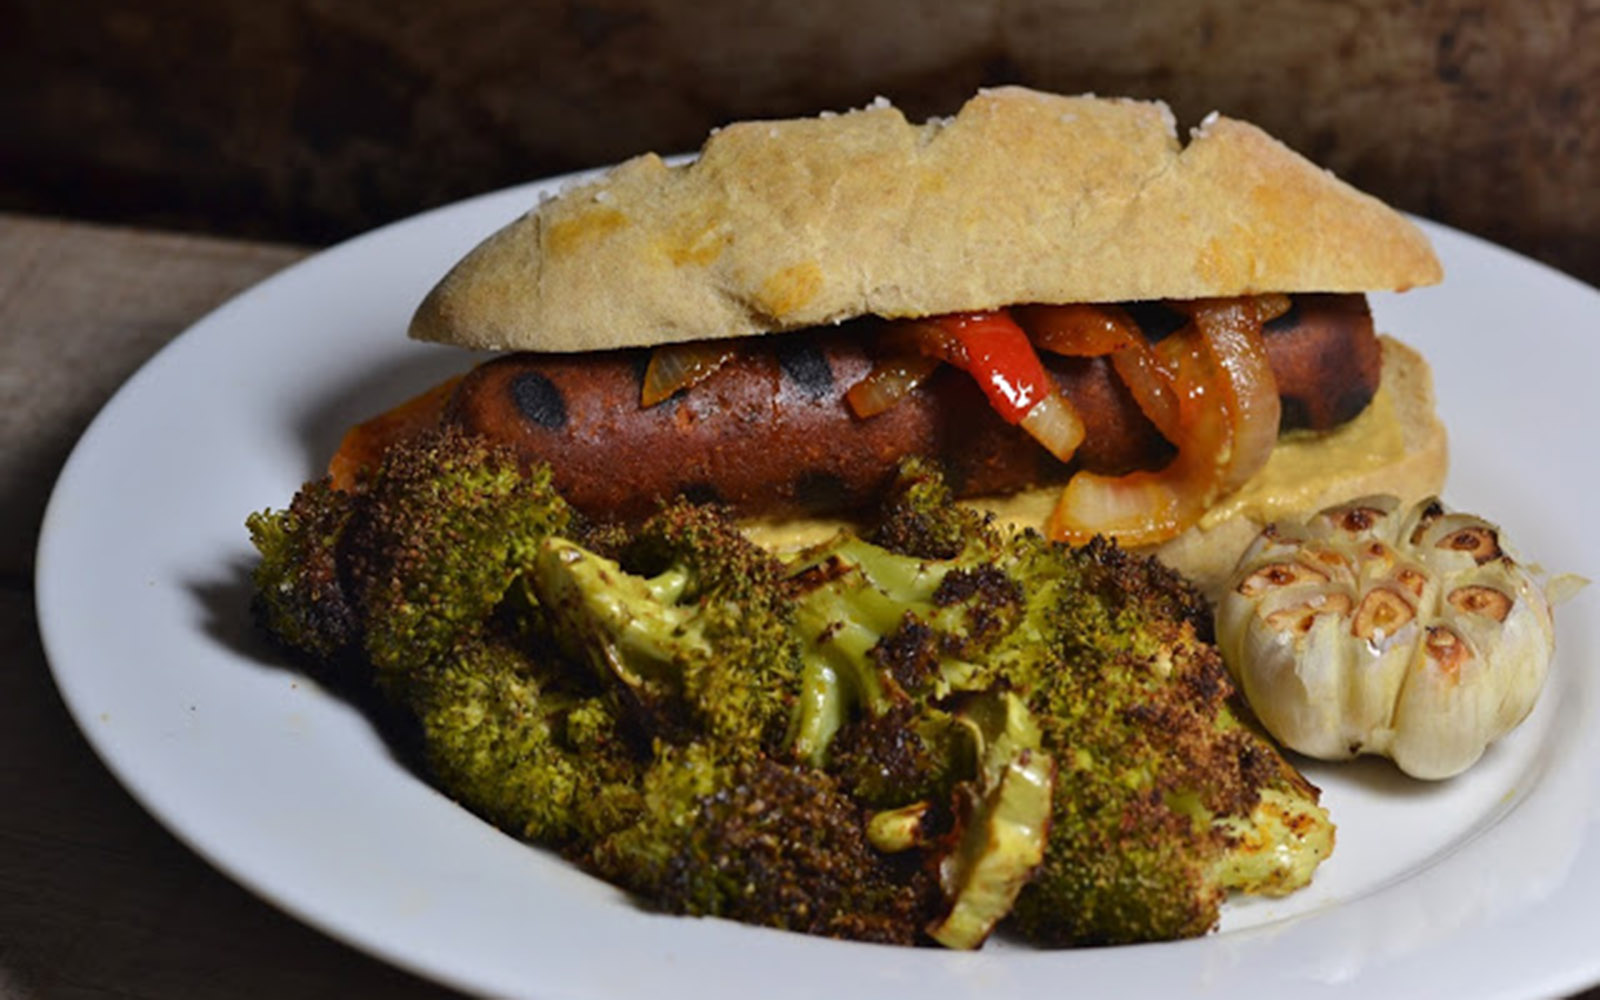 Vegan Sausages with Homemade Buns and Roasted Broccoli